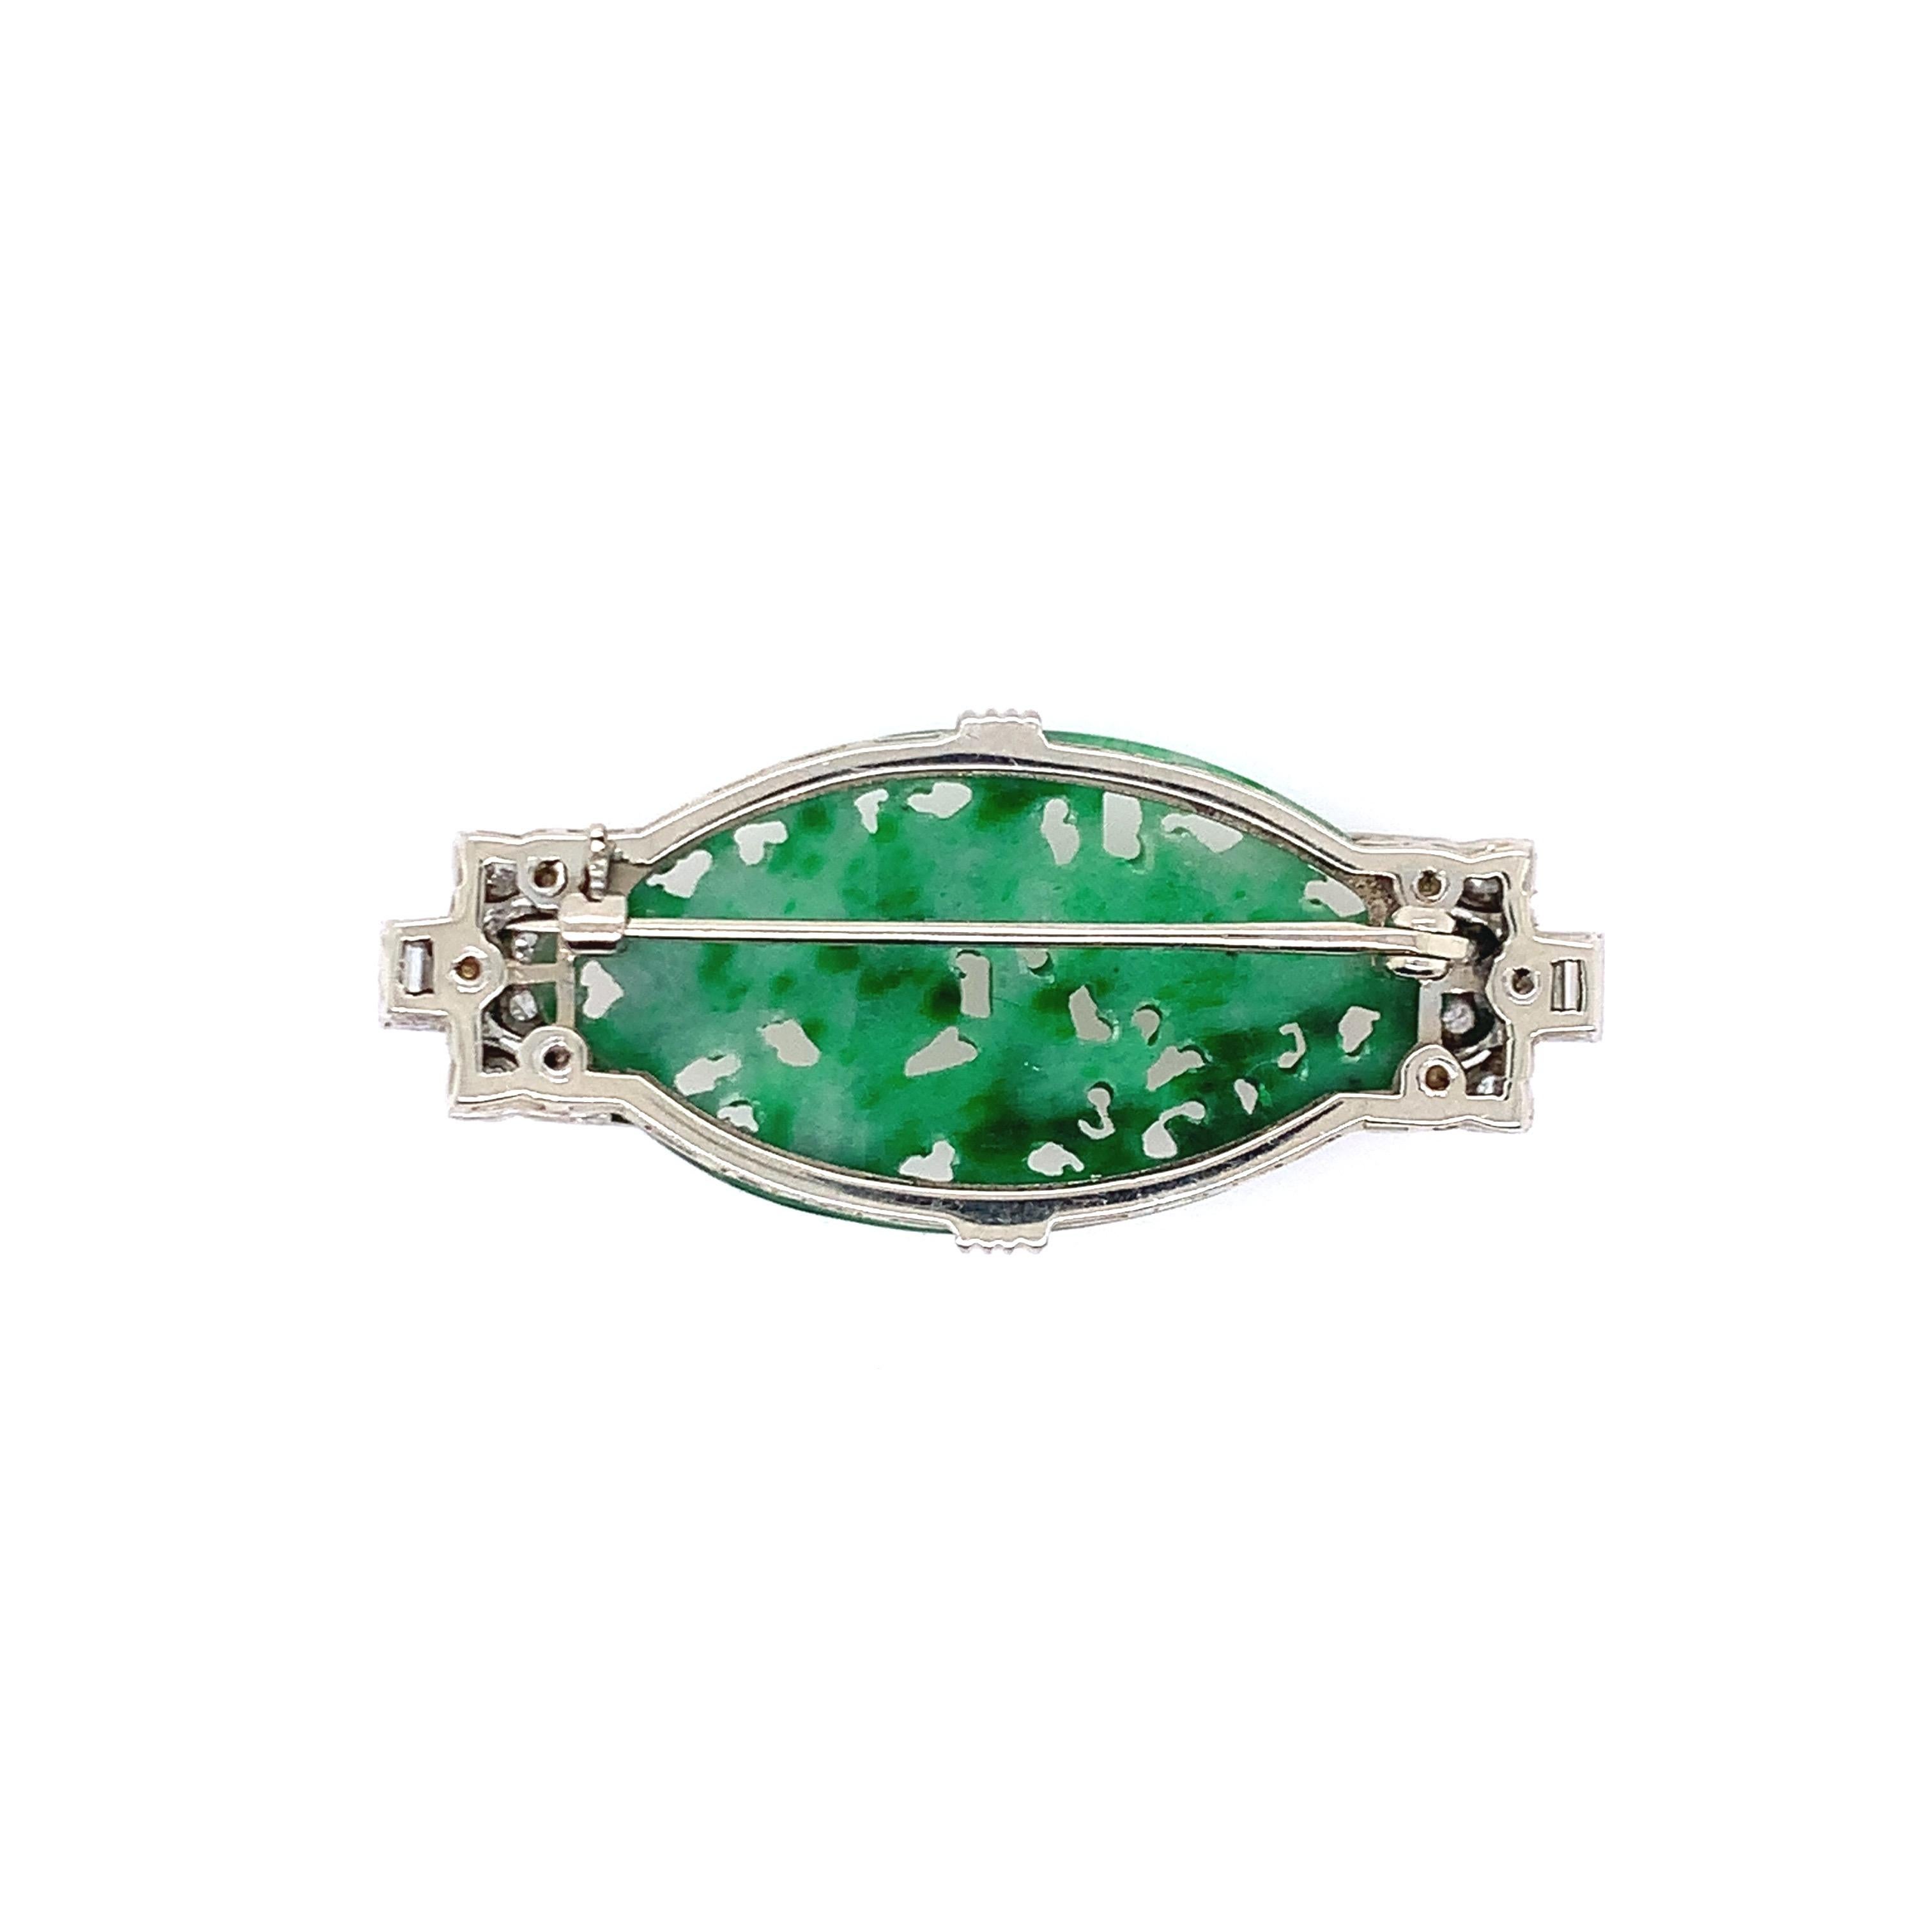 With a beautiful work of natural, type A jade at its center, this art deco brooch is set in platinum and consists of 0.50 carat diamonds. Its length is 0.88 inch and its width is approximately 2 inches. The total weight is 12.3 grams. 